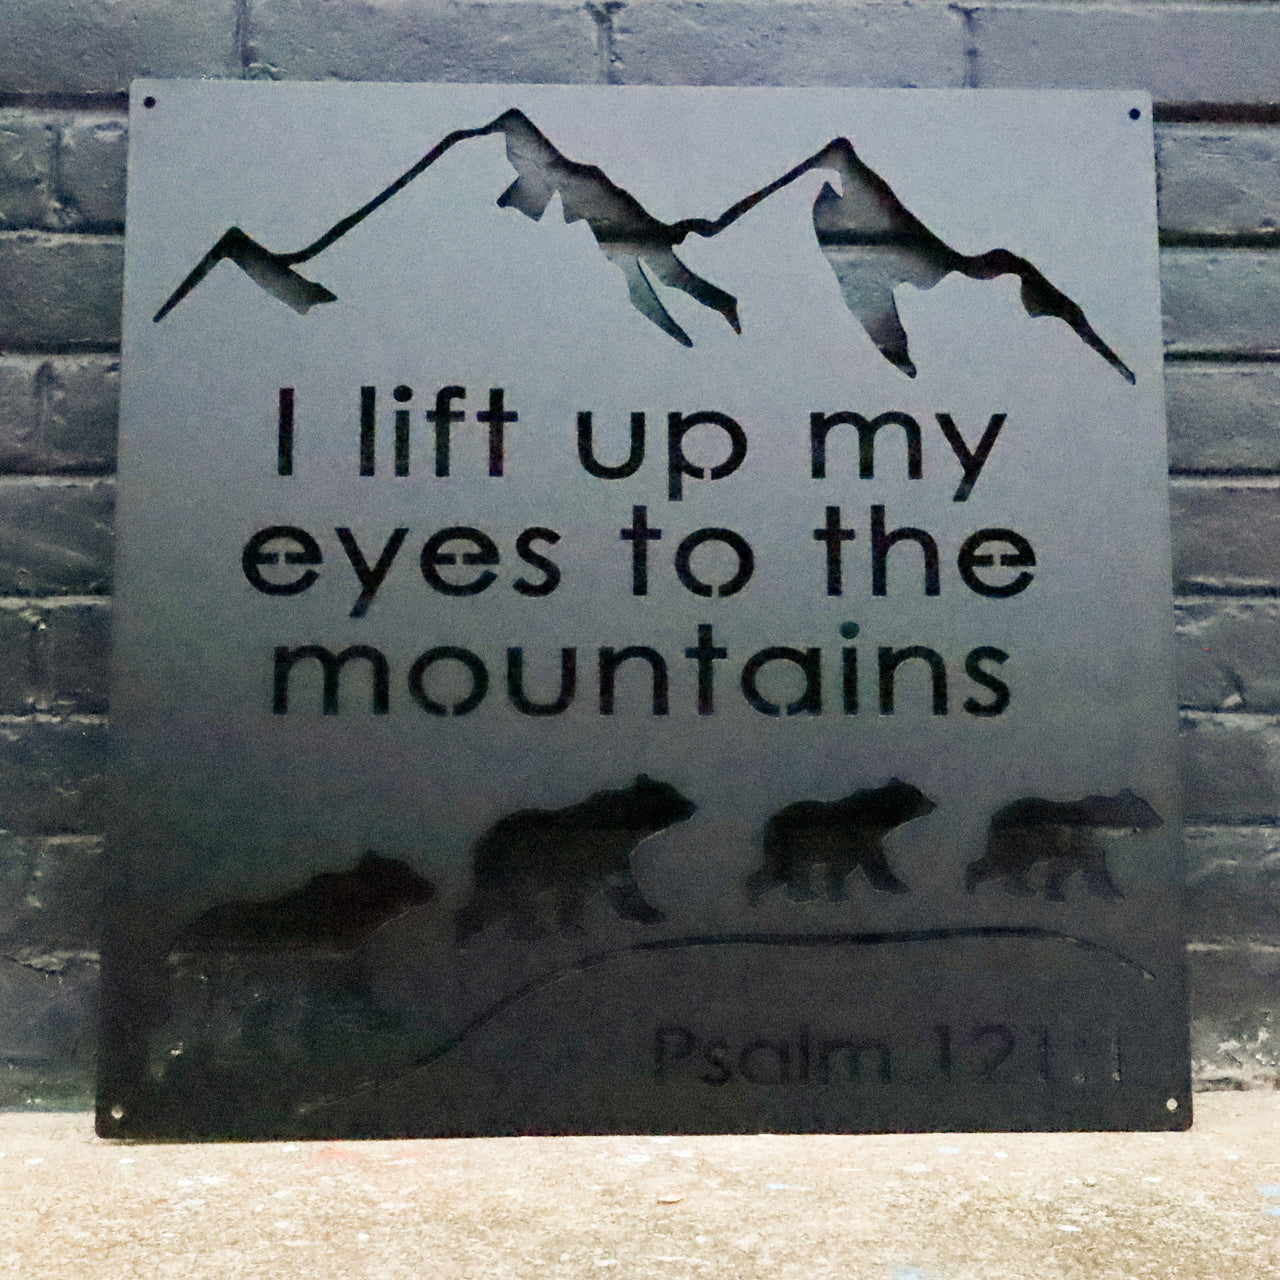 I lift up my Eyes to the Mountains and Bears Metal Sign - Inspirational Bible Quote Wall Art - Rustic Religious Home Decor